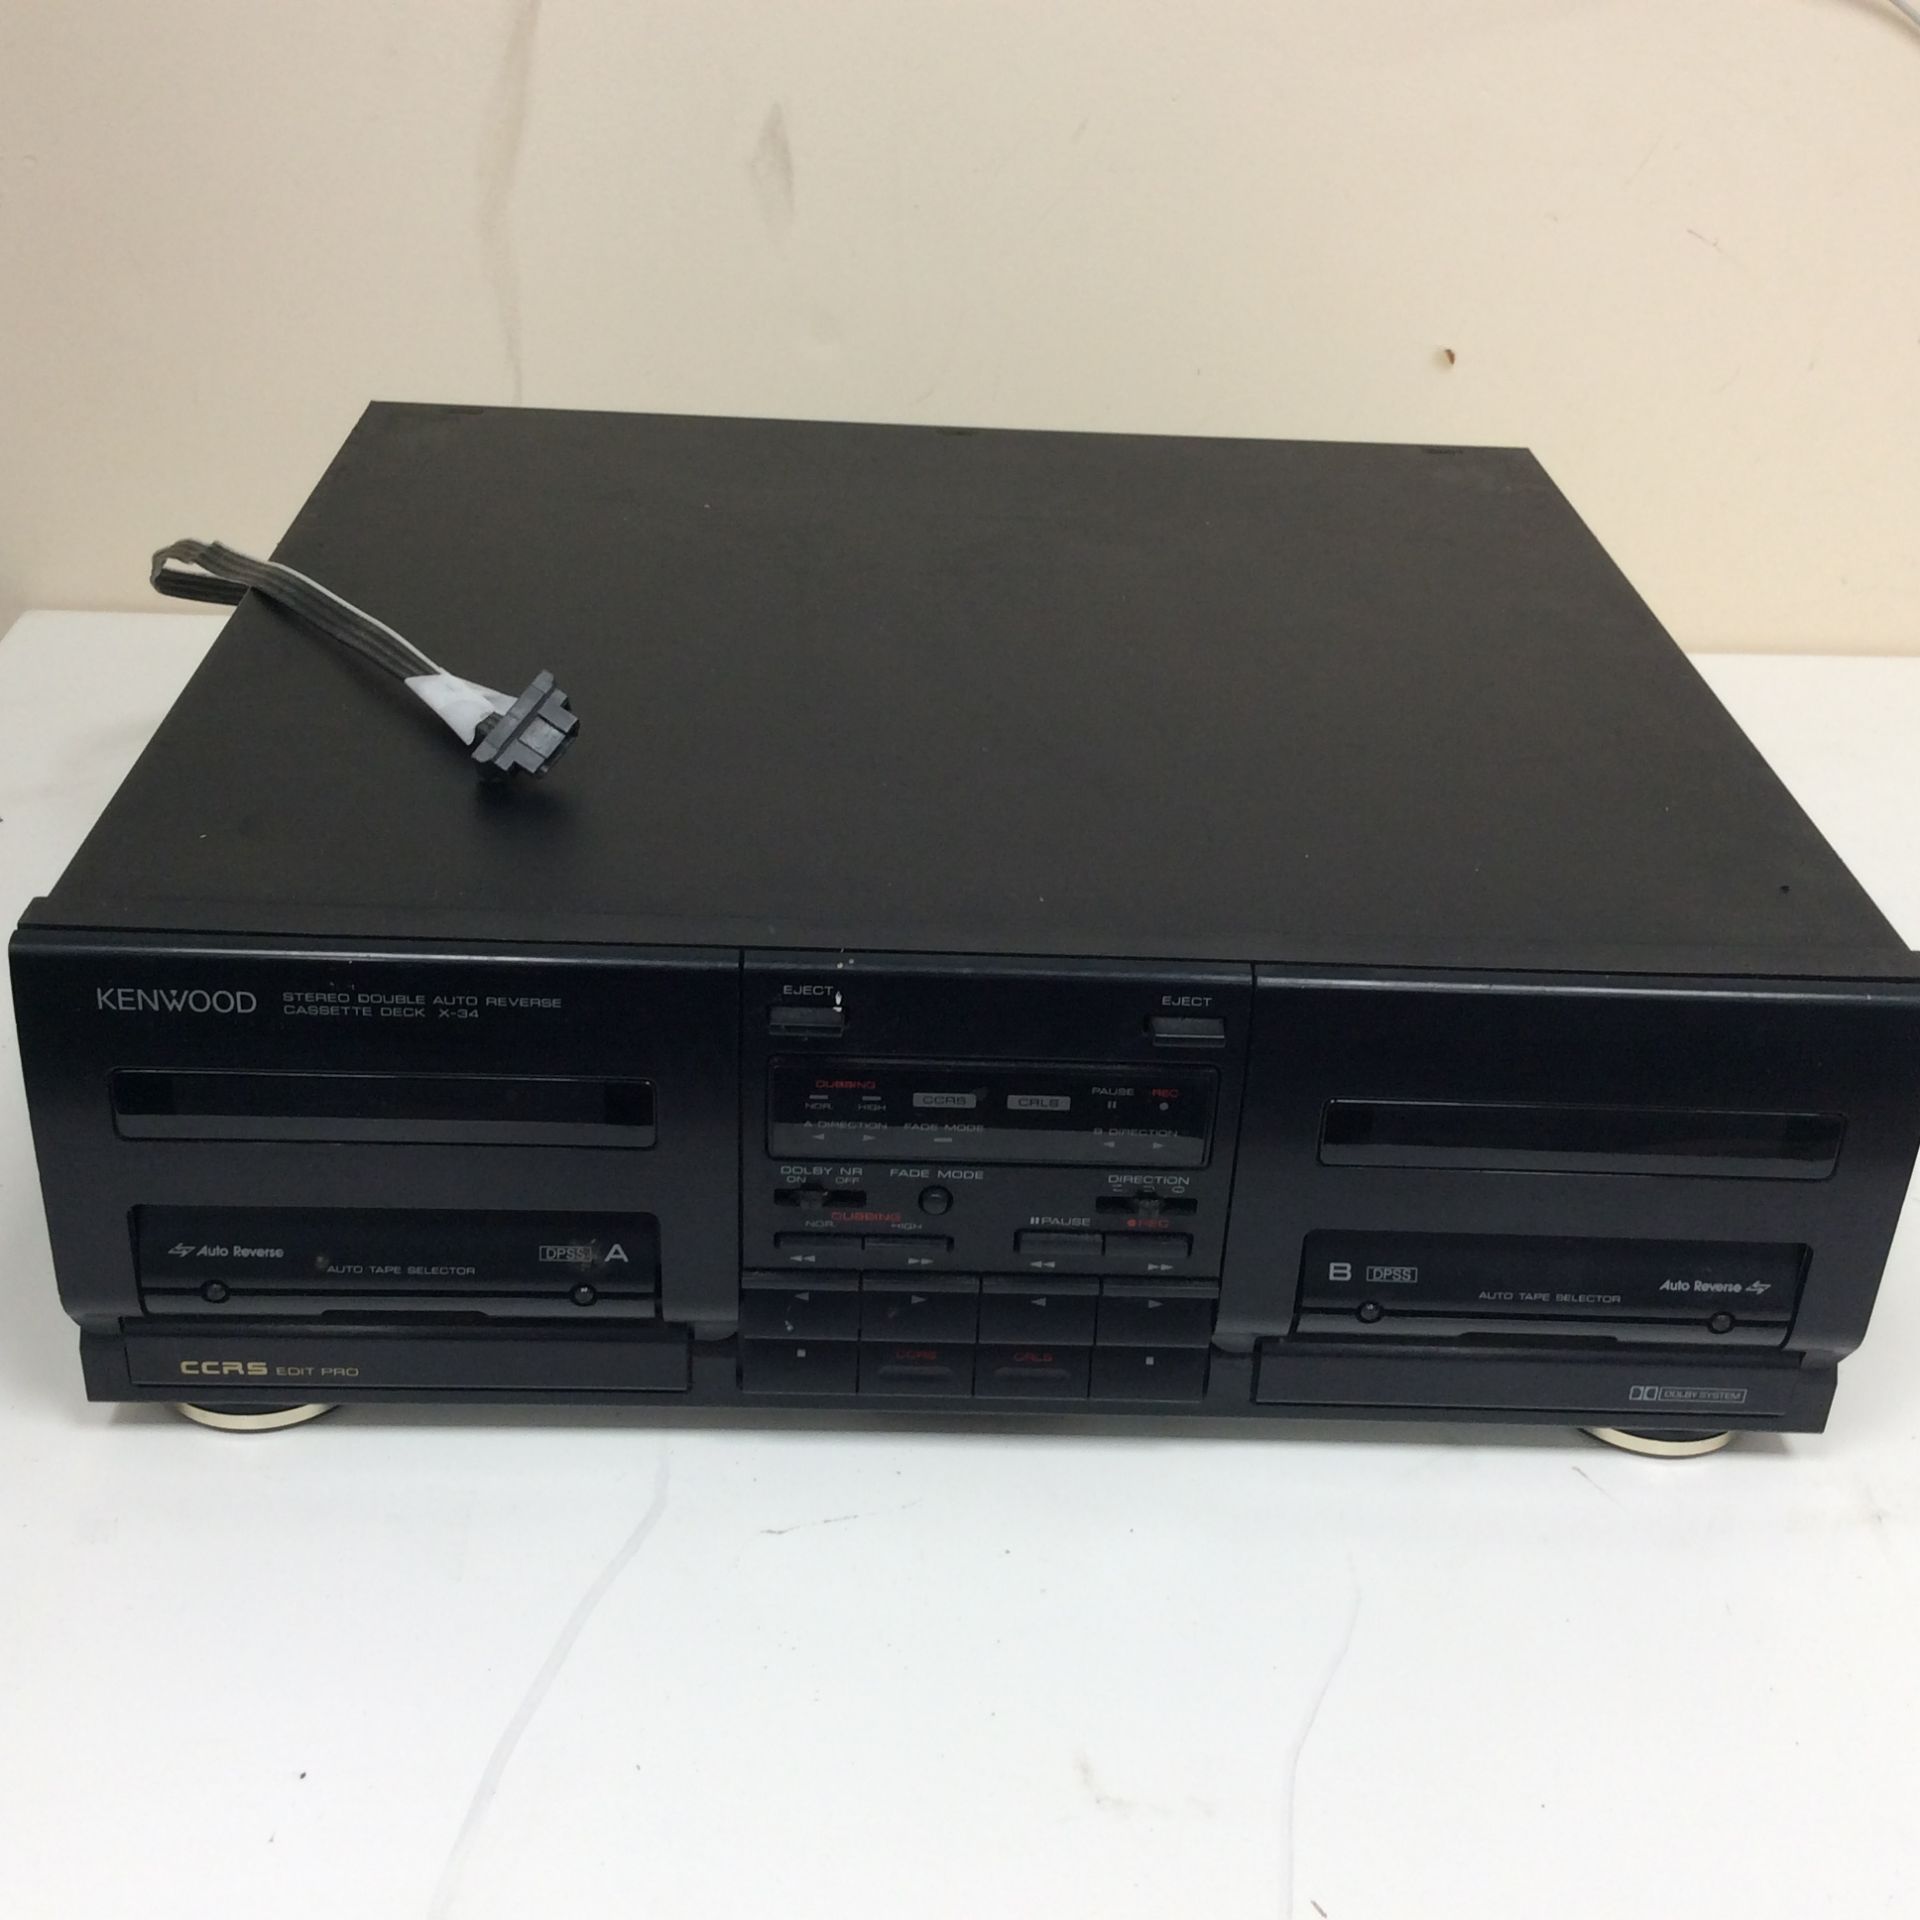 Kenwood stereo double auto reverse deck x-34